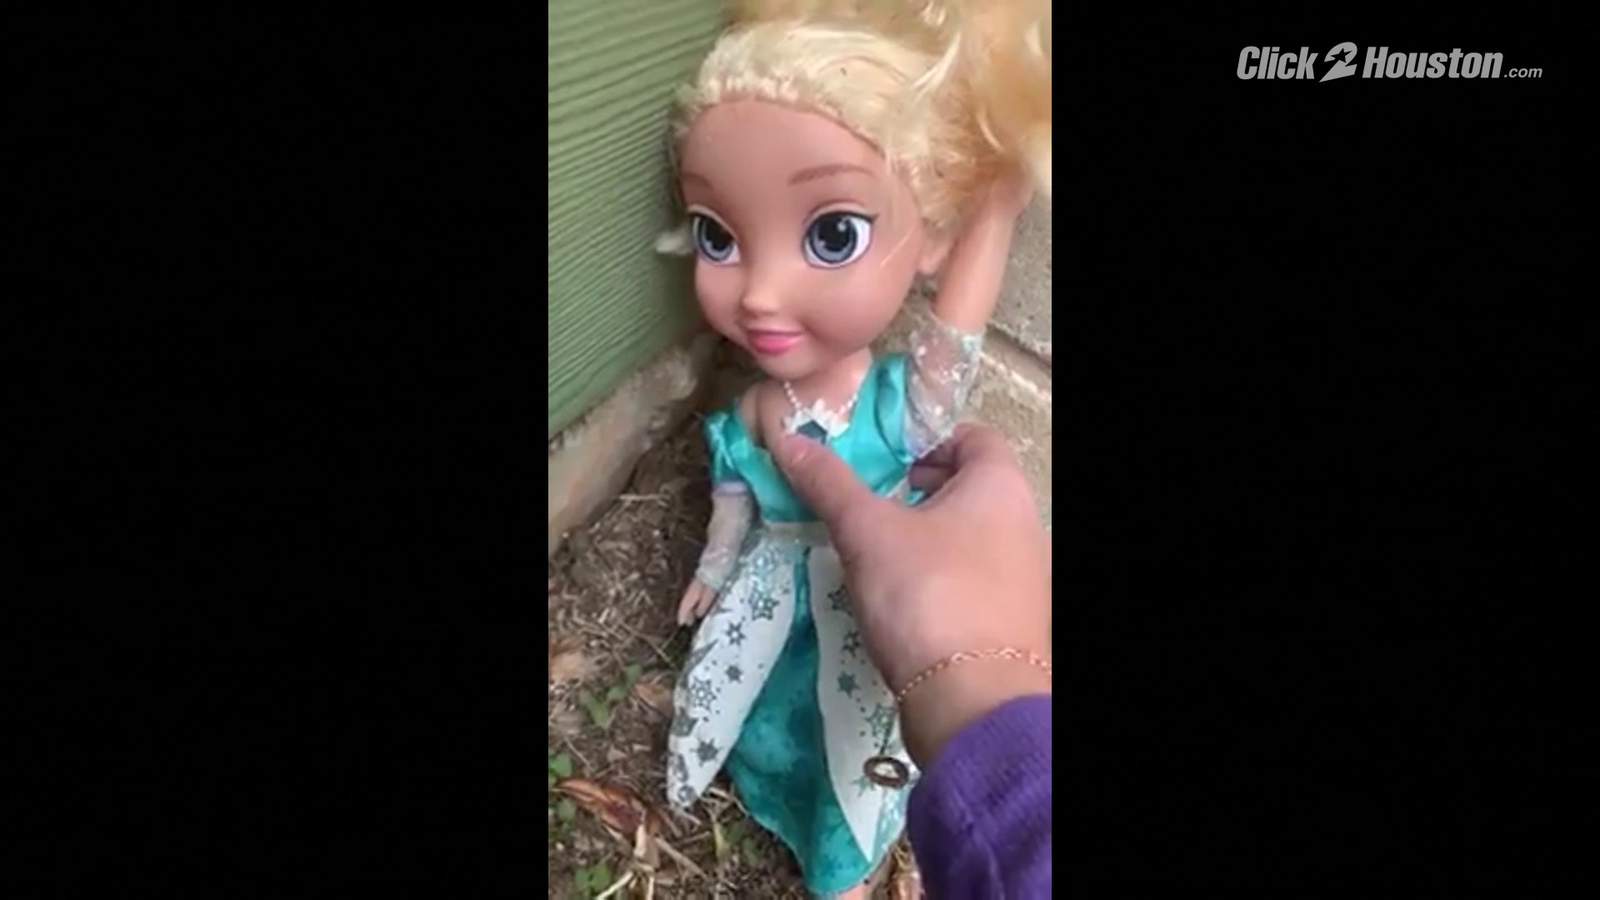 They can’t ‘Let It Go’: 'Haunted’ Elsa doll returns to Houston family after being thrown out multiple times